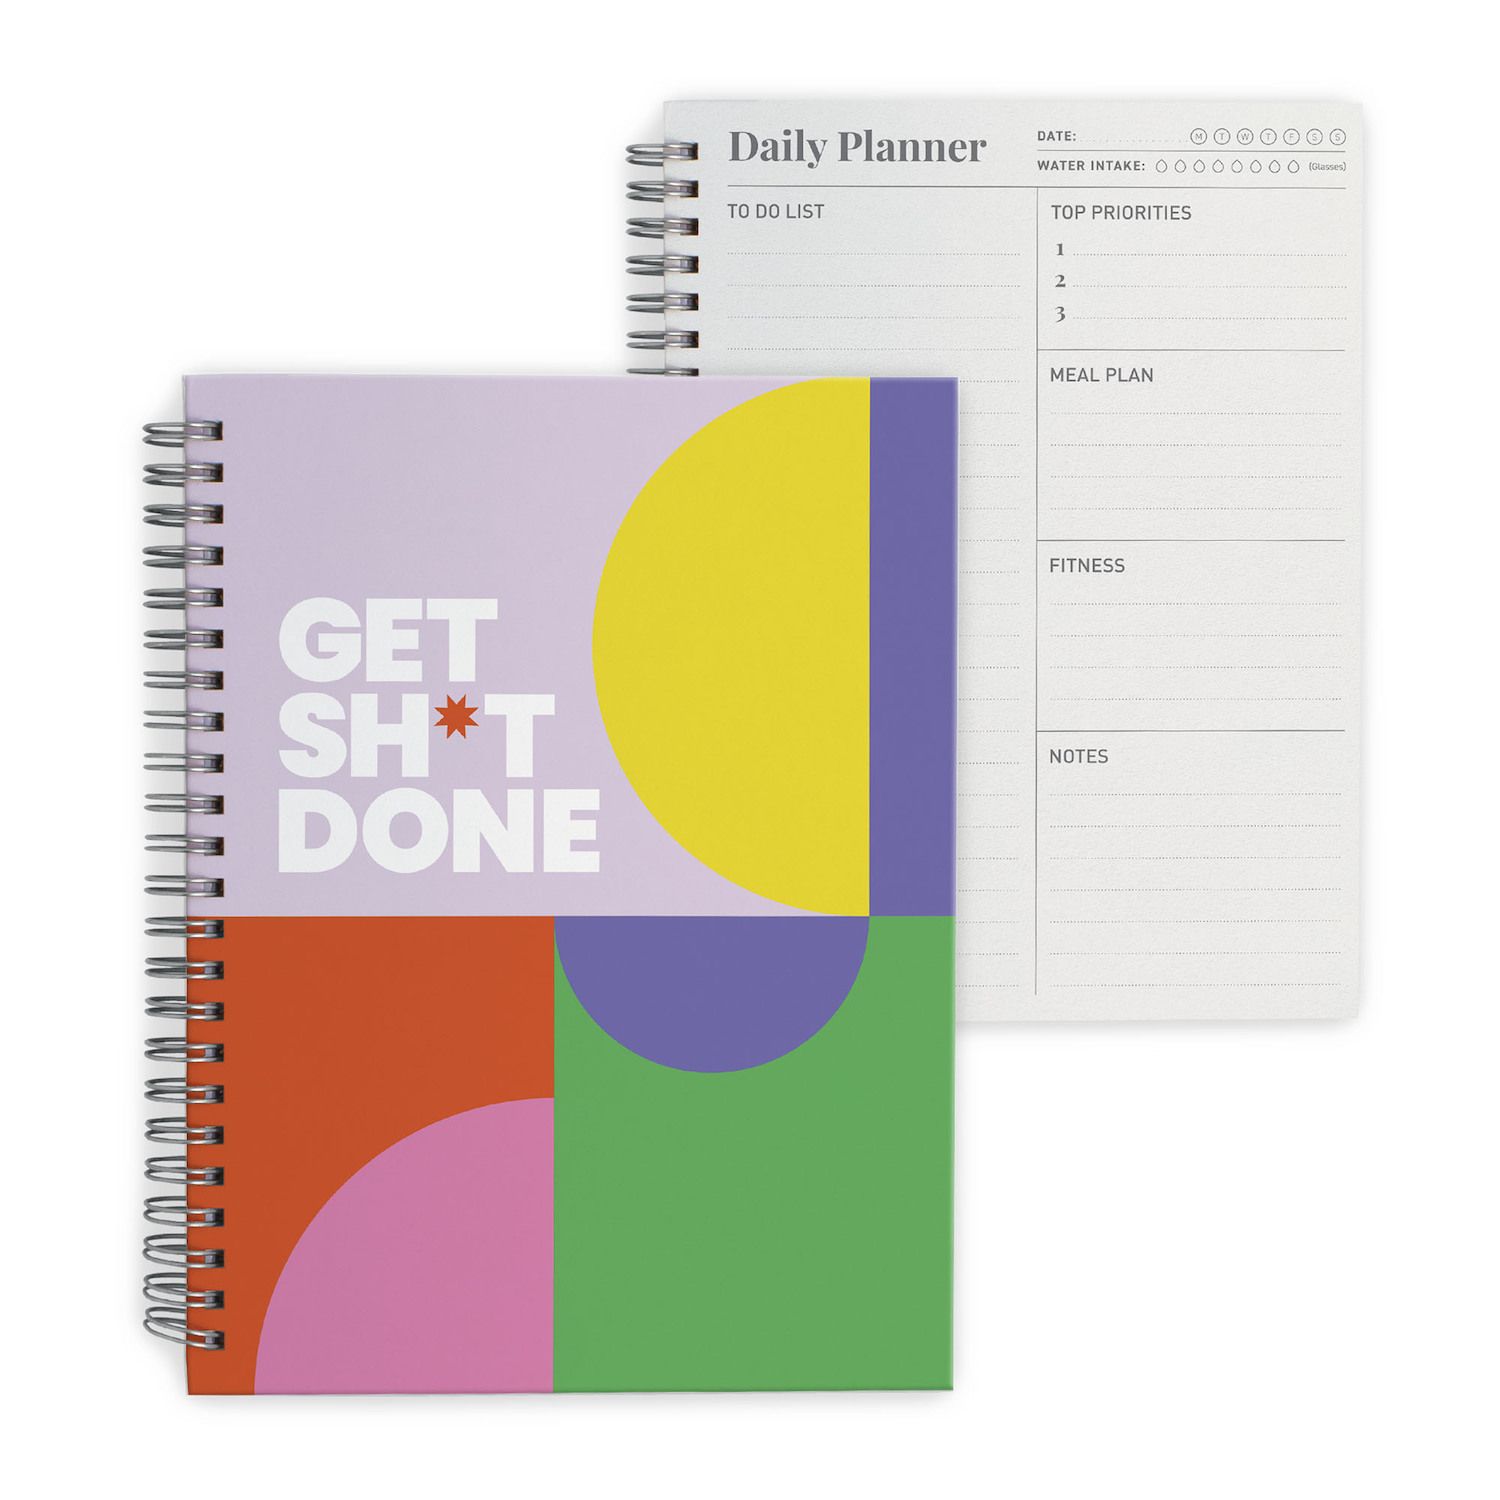 Juvale 2 Pack Meeting Notebooks For Work, Spiral-bound Daily